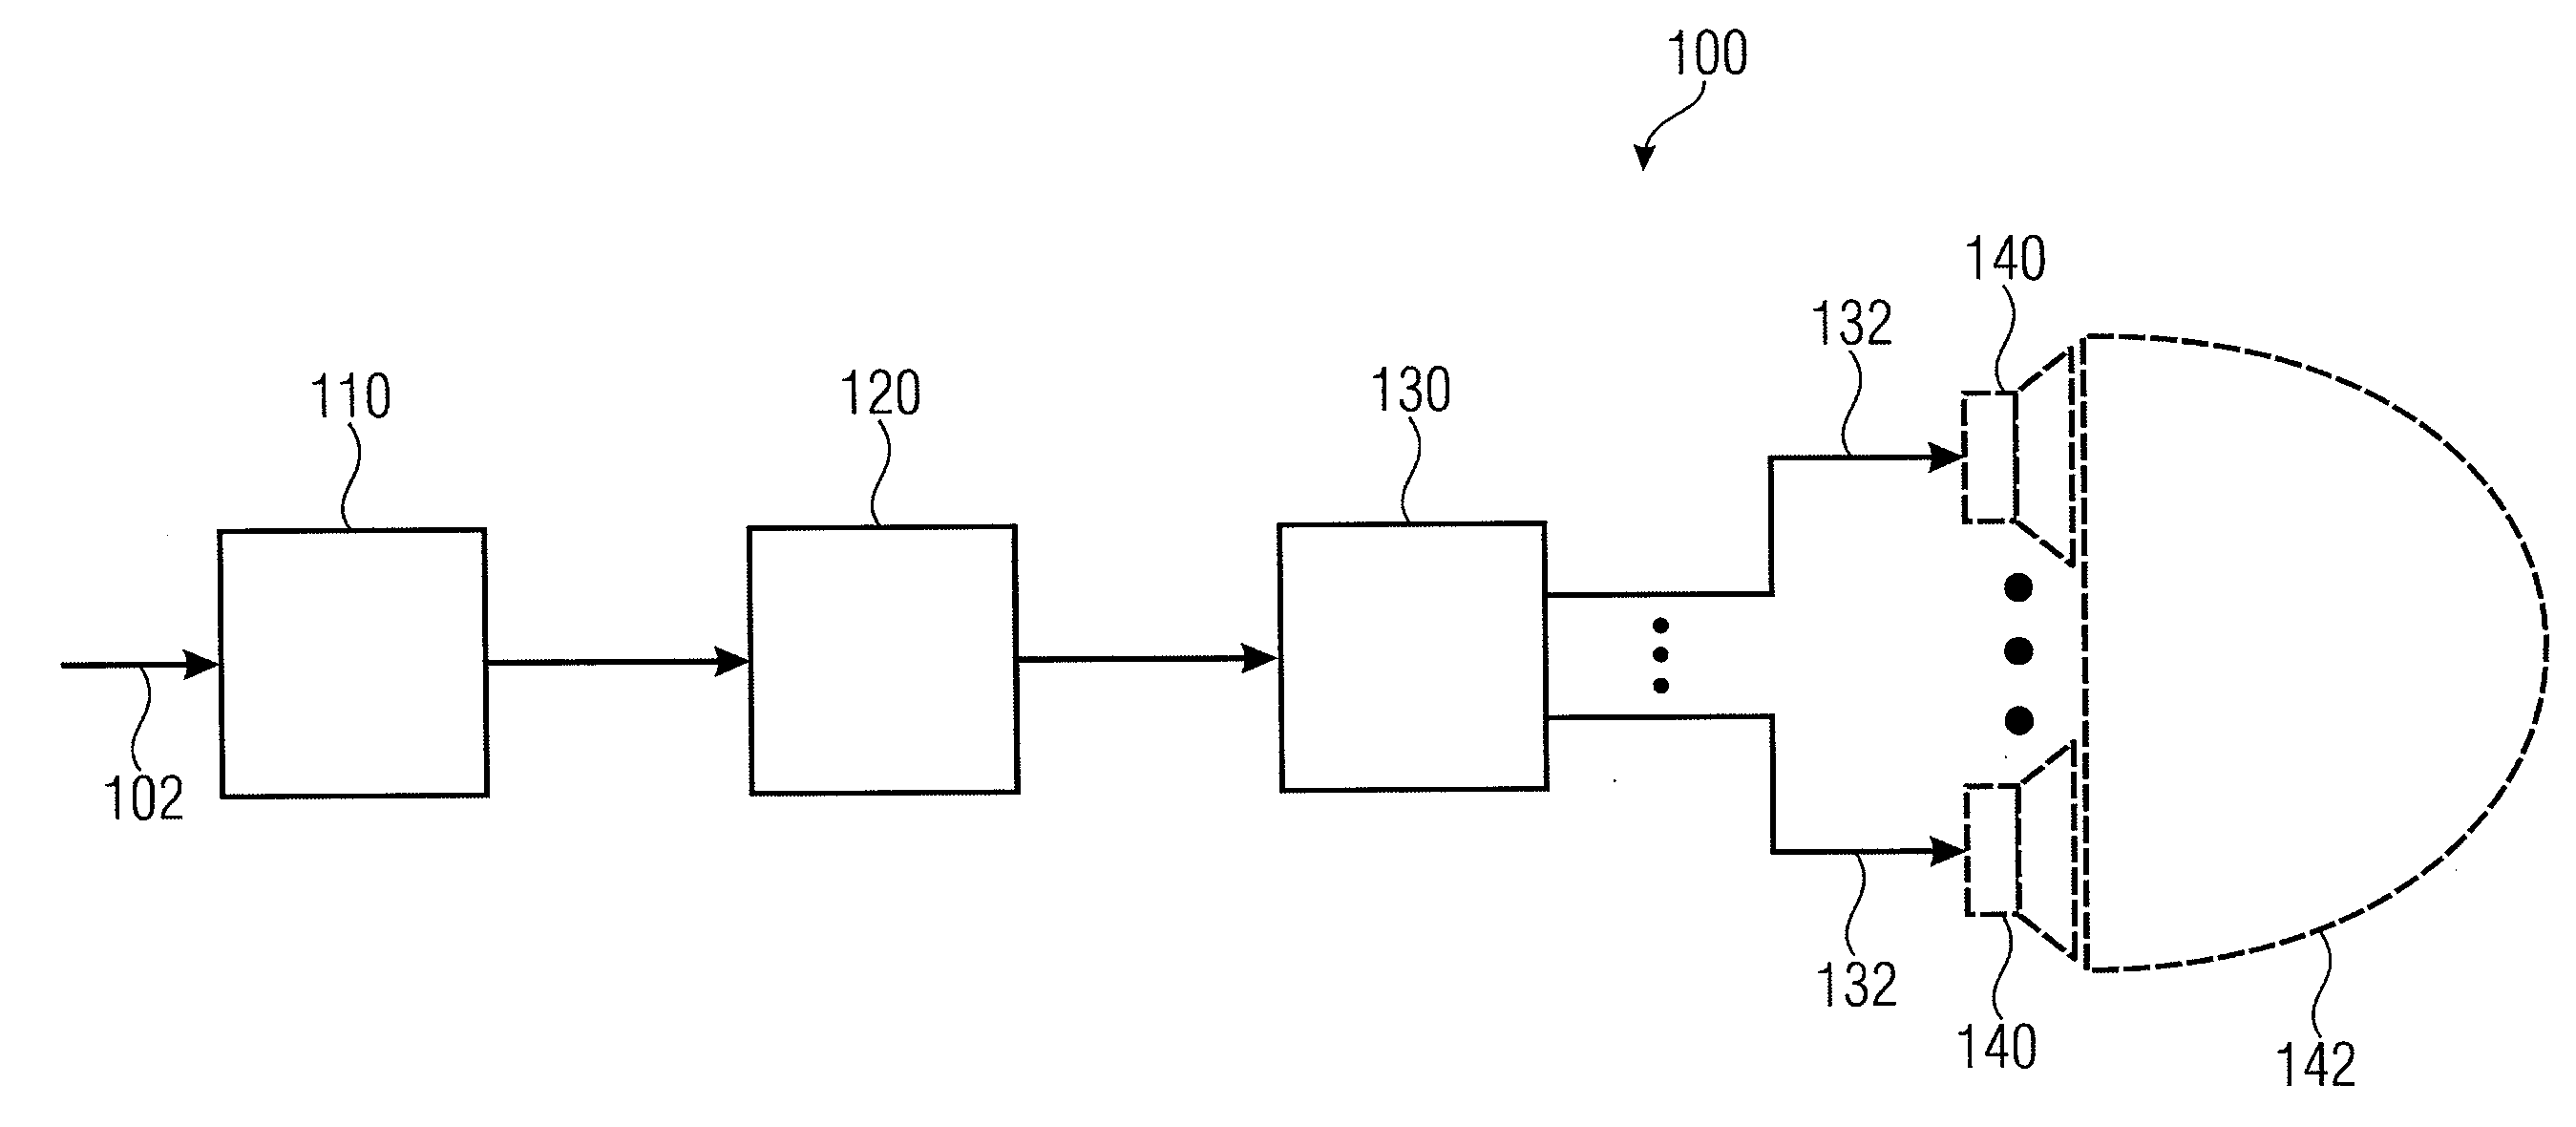 Apparatus for Processing an Audio Signal